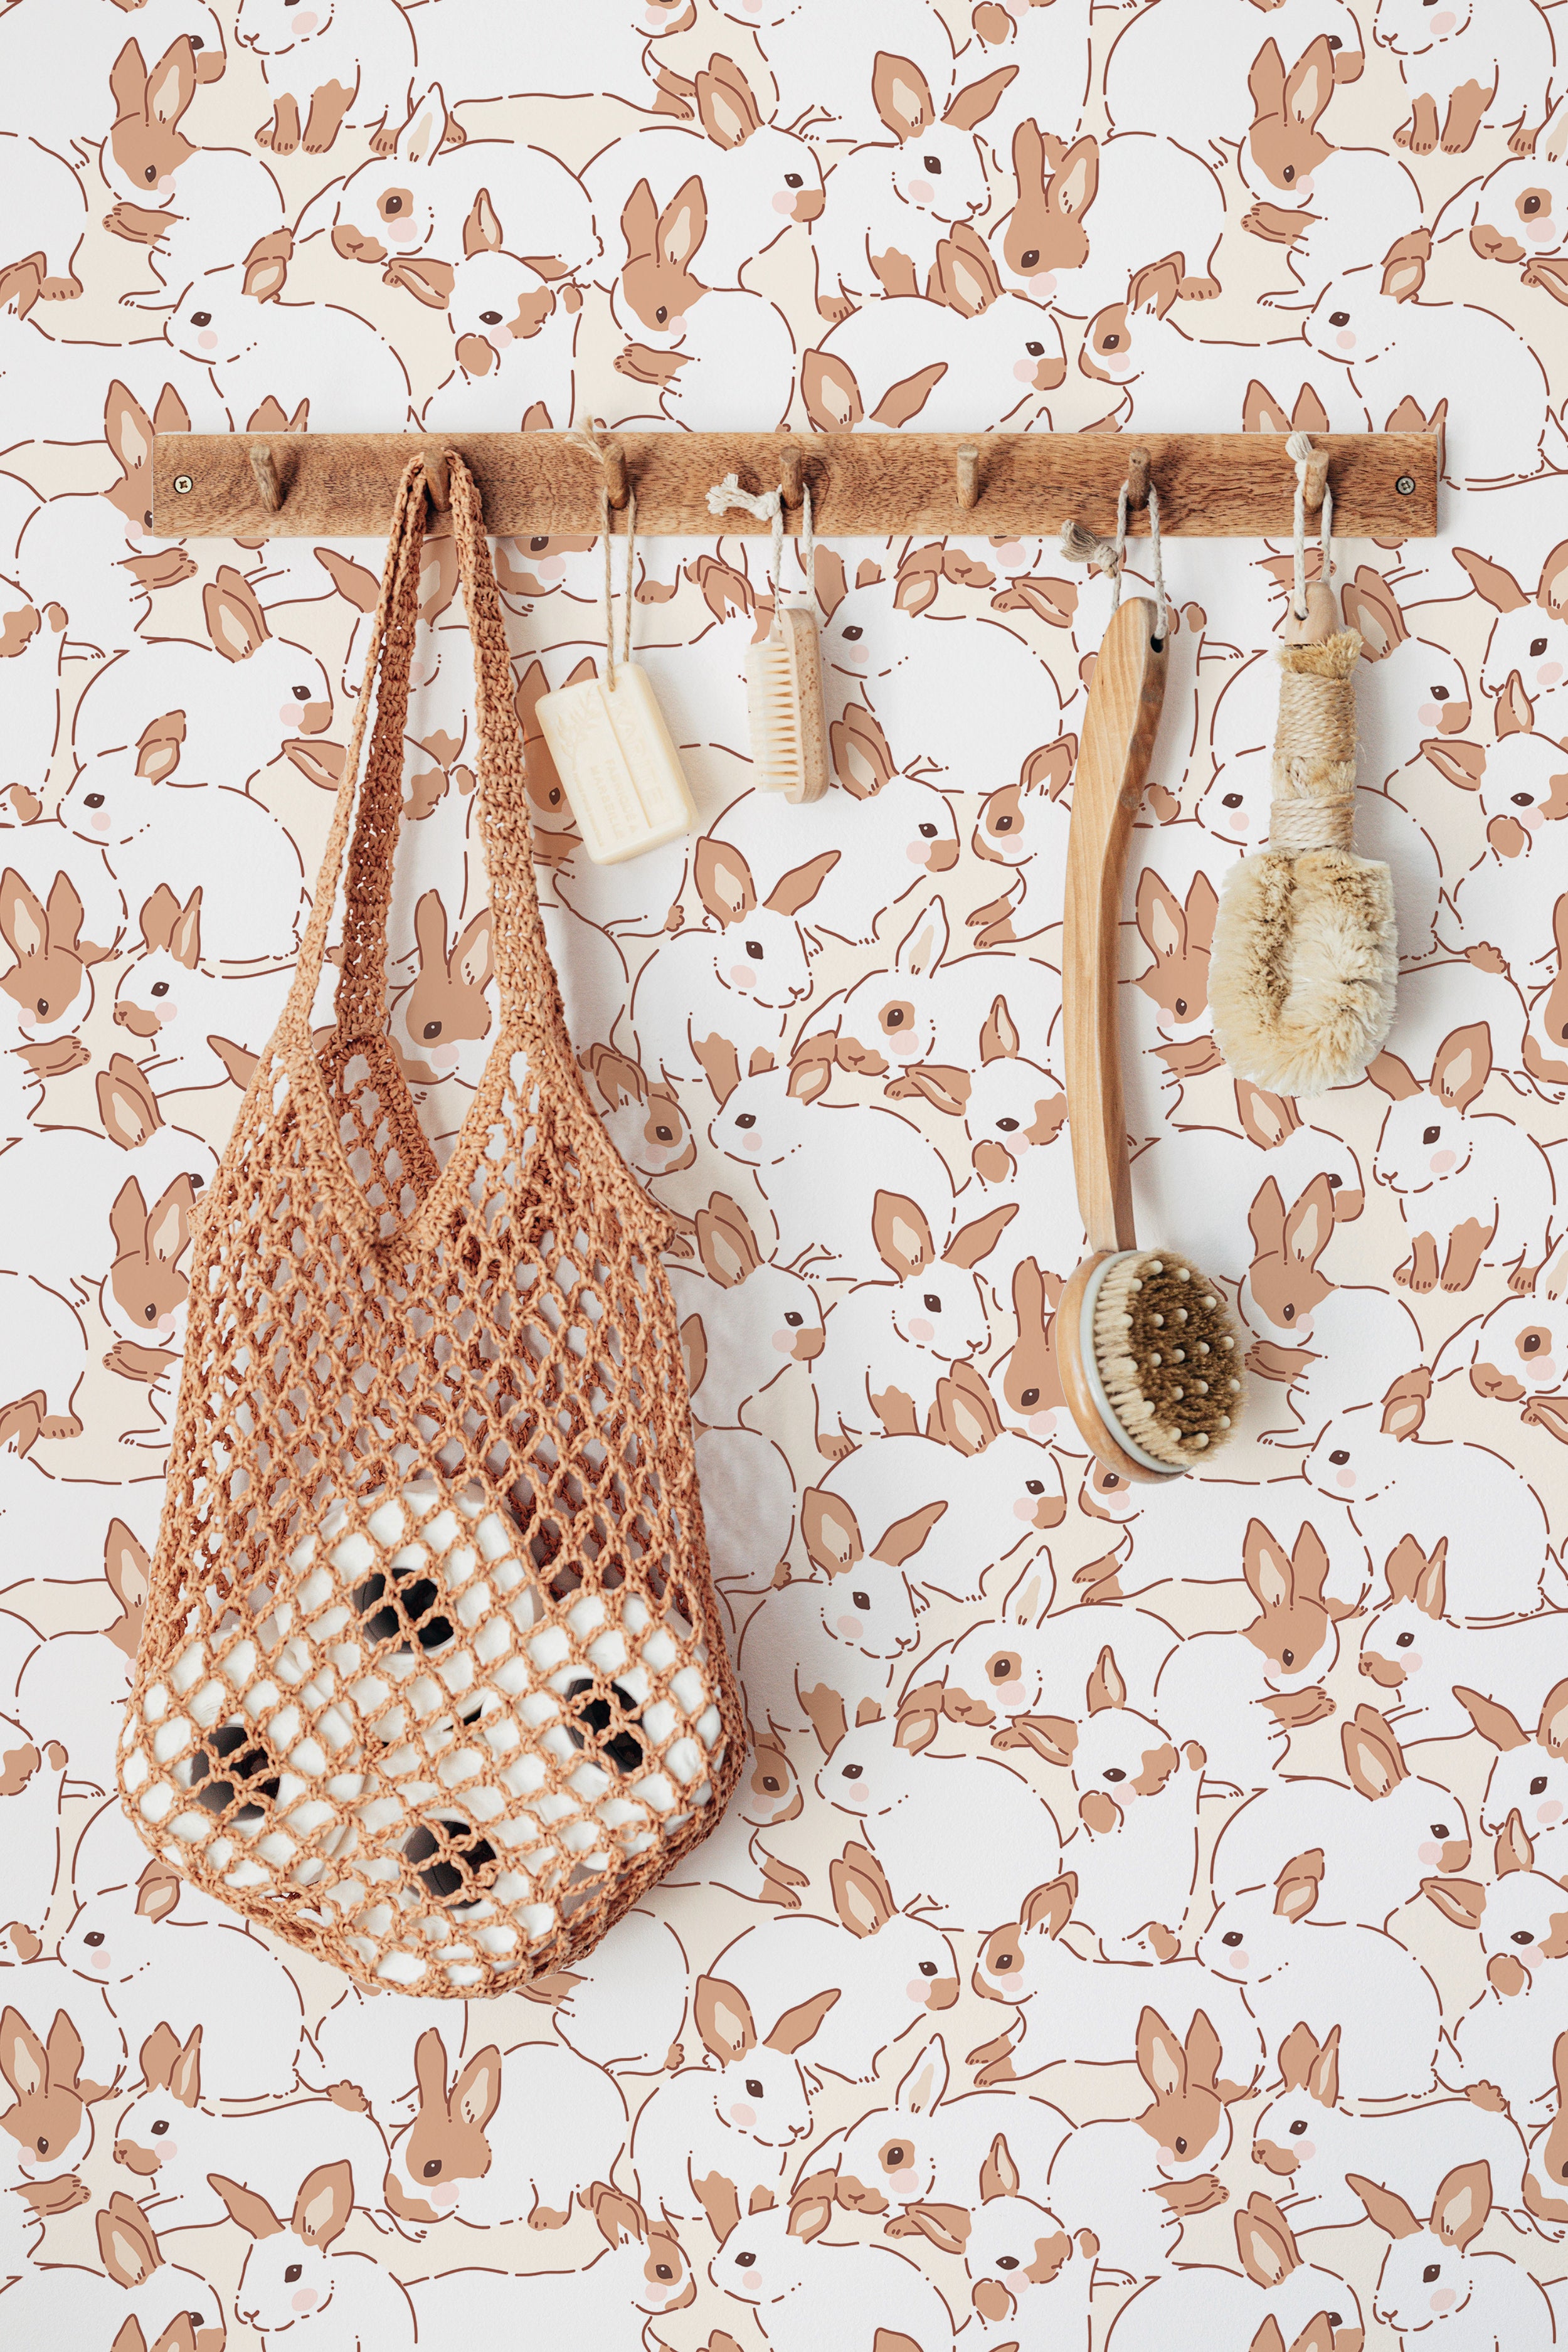 Interior decor scene showcasing the Lapinou Wallpaper with beige bunny patterns. A wooden rack holds various natural bath accessories including a mesh bag, a wooden brush, and two bars of soap, enhancing the rustic charm of the room.